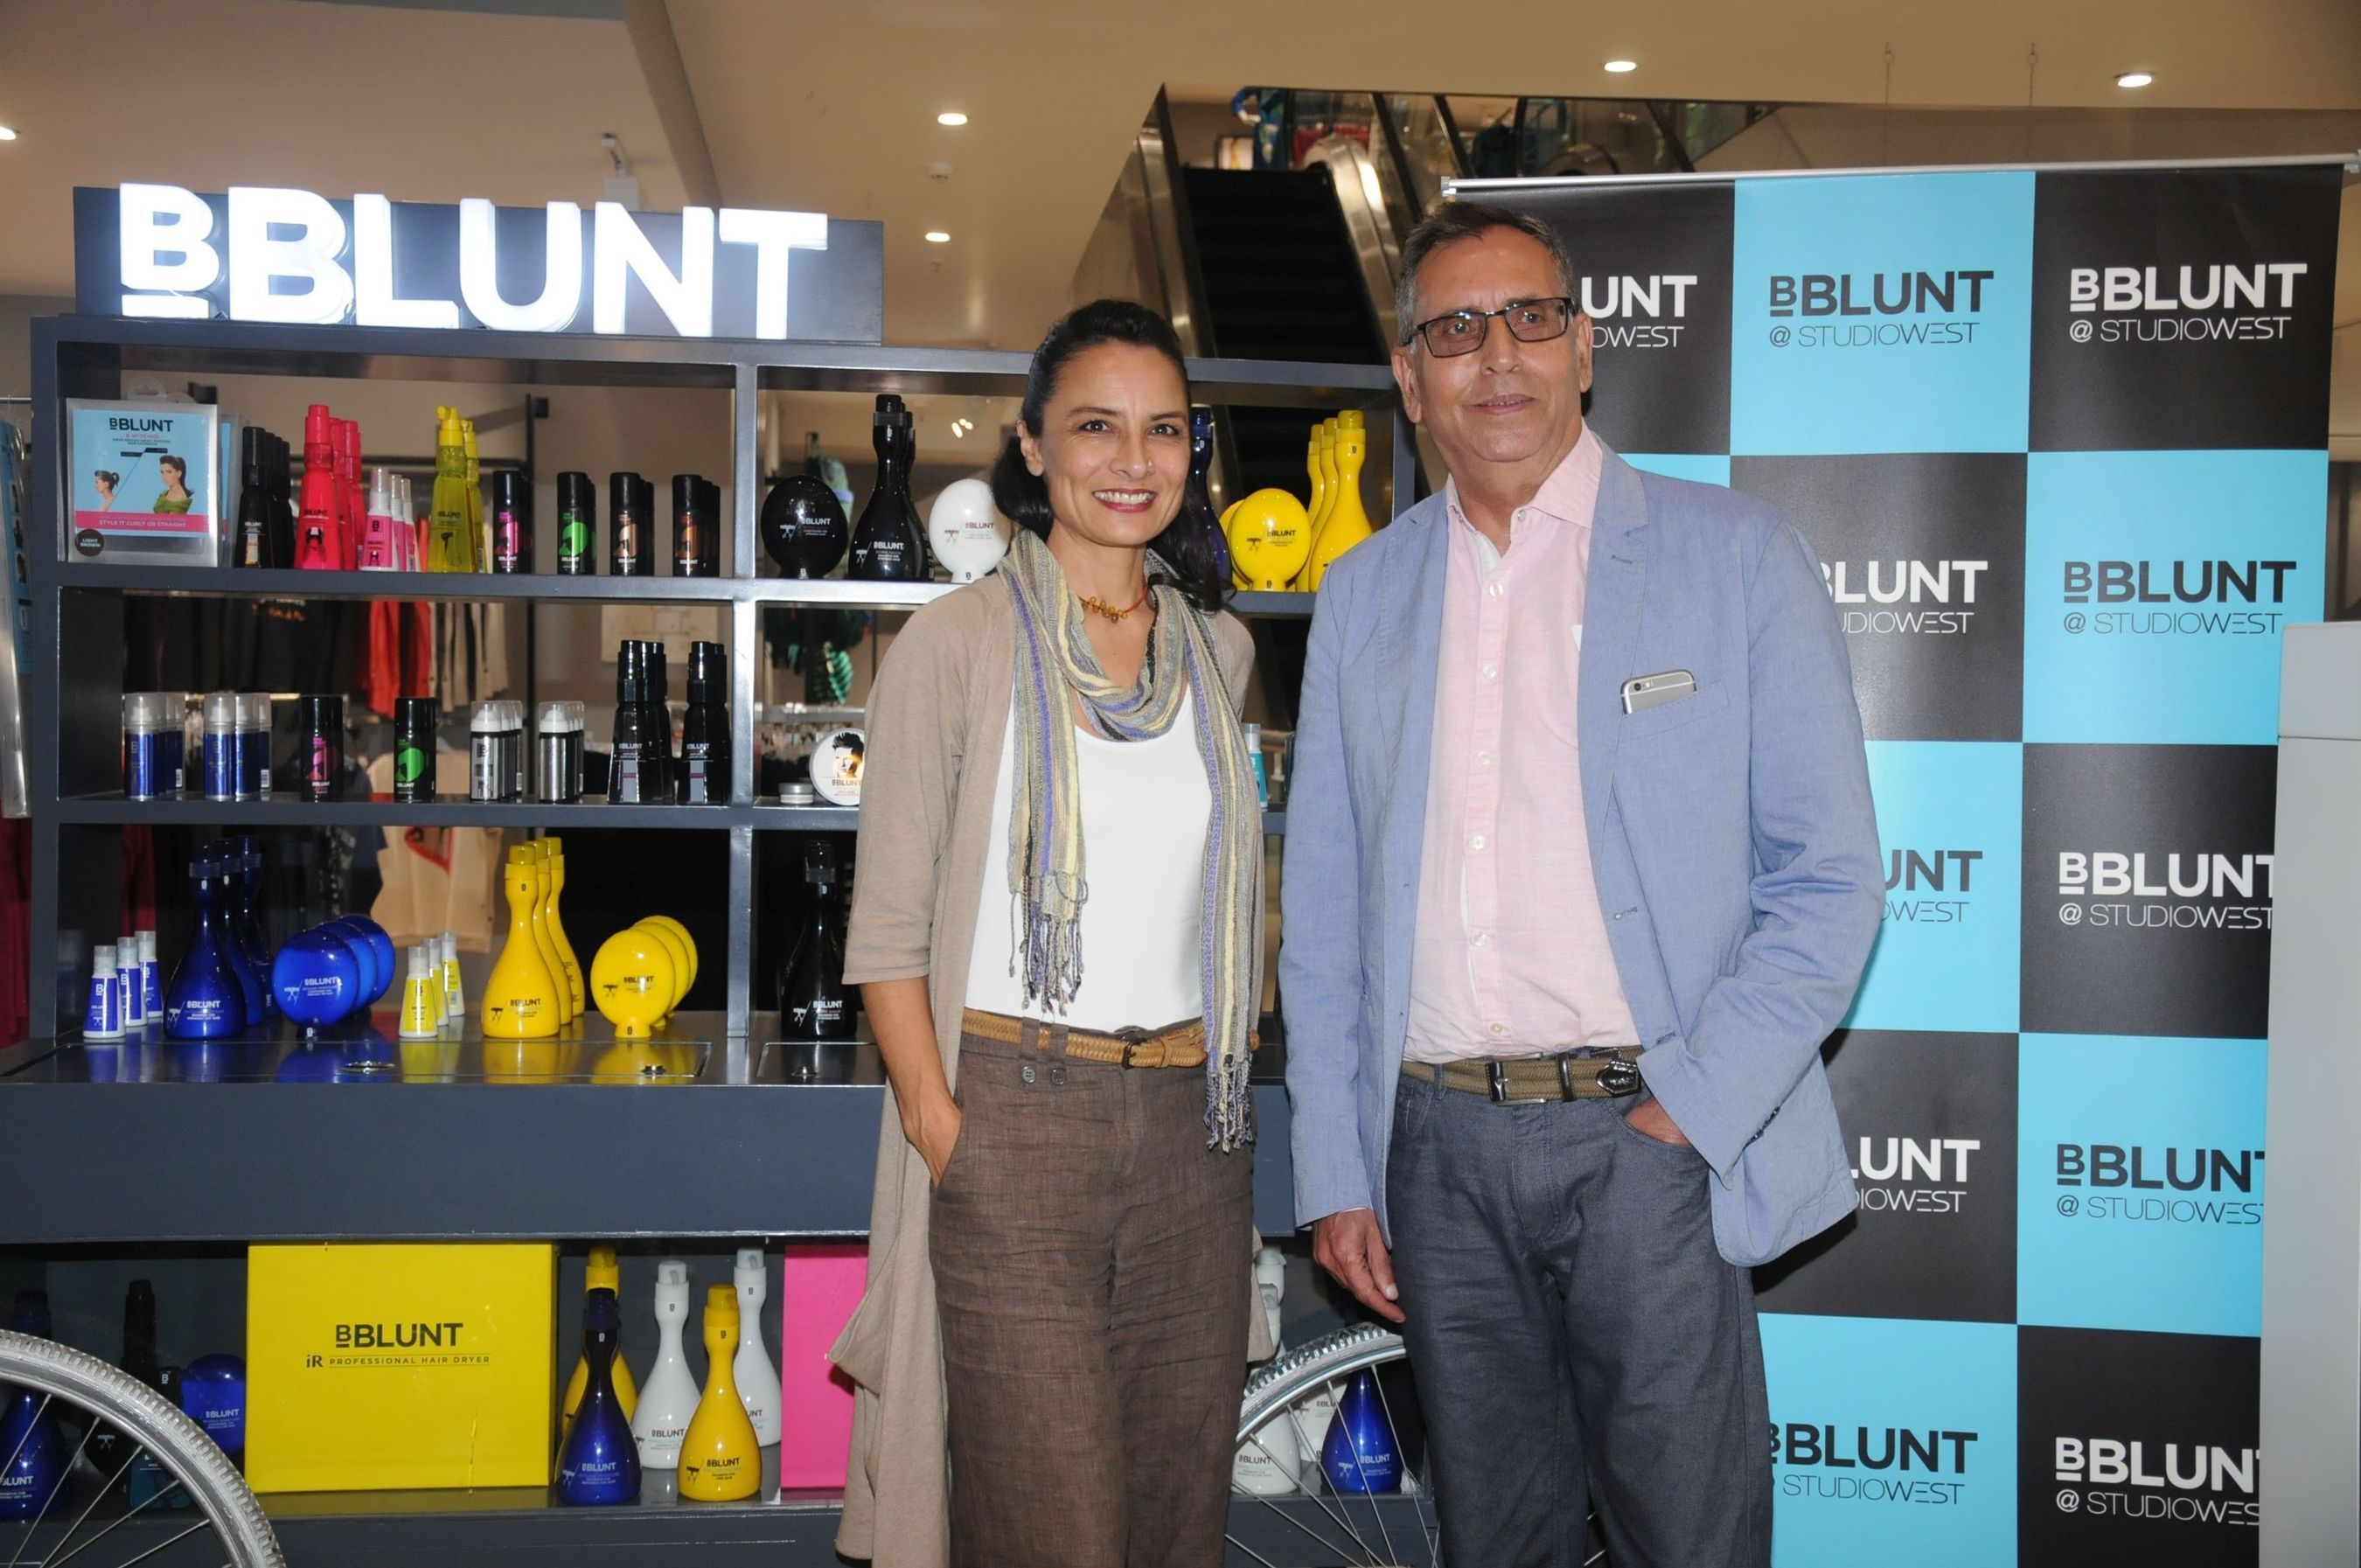 BBLUNT@StudioWest, the First-of-its-kind In-store Salon for Bangaloreans